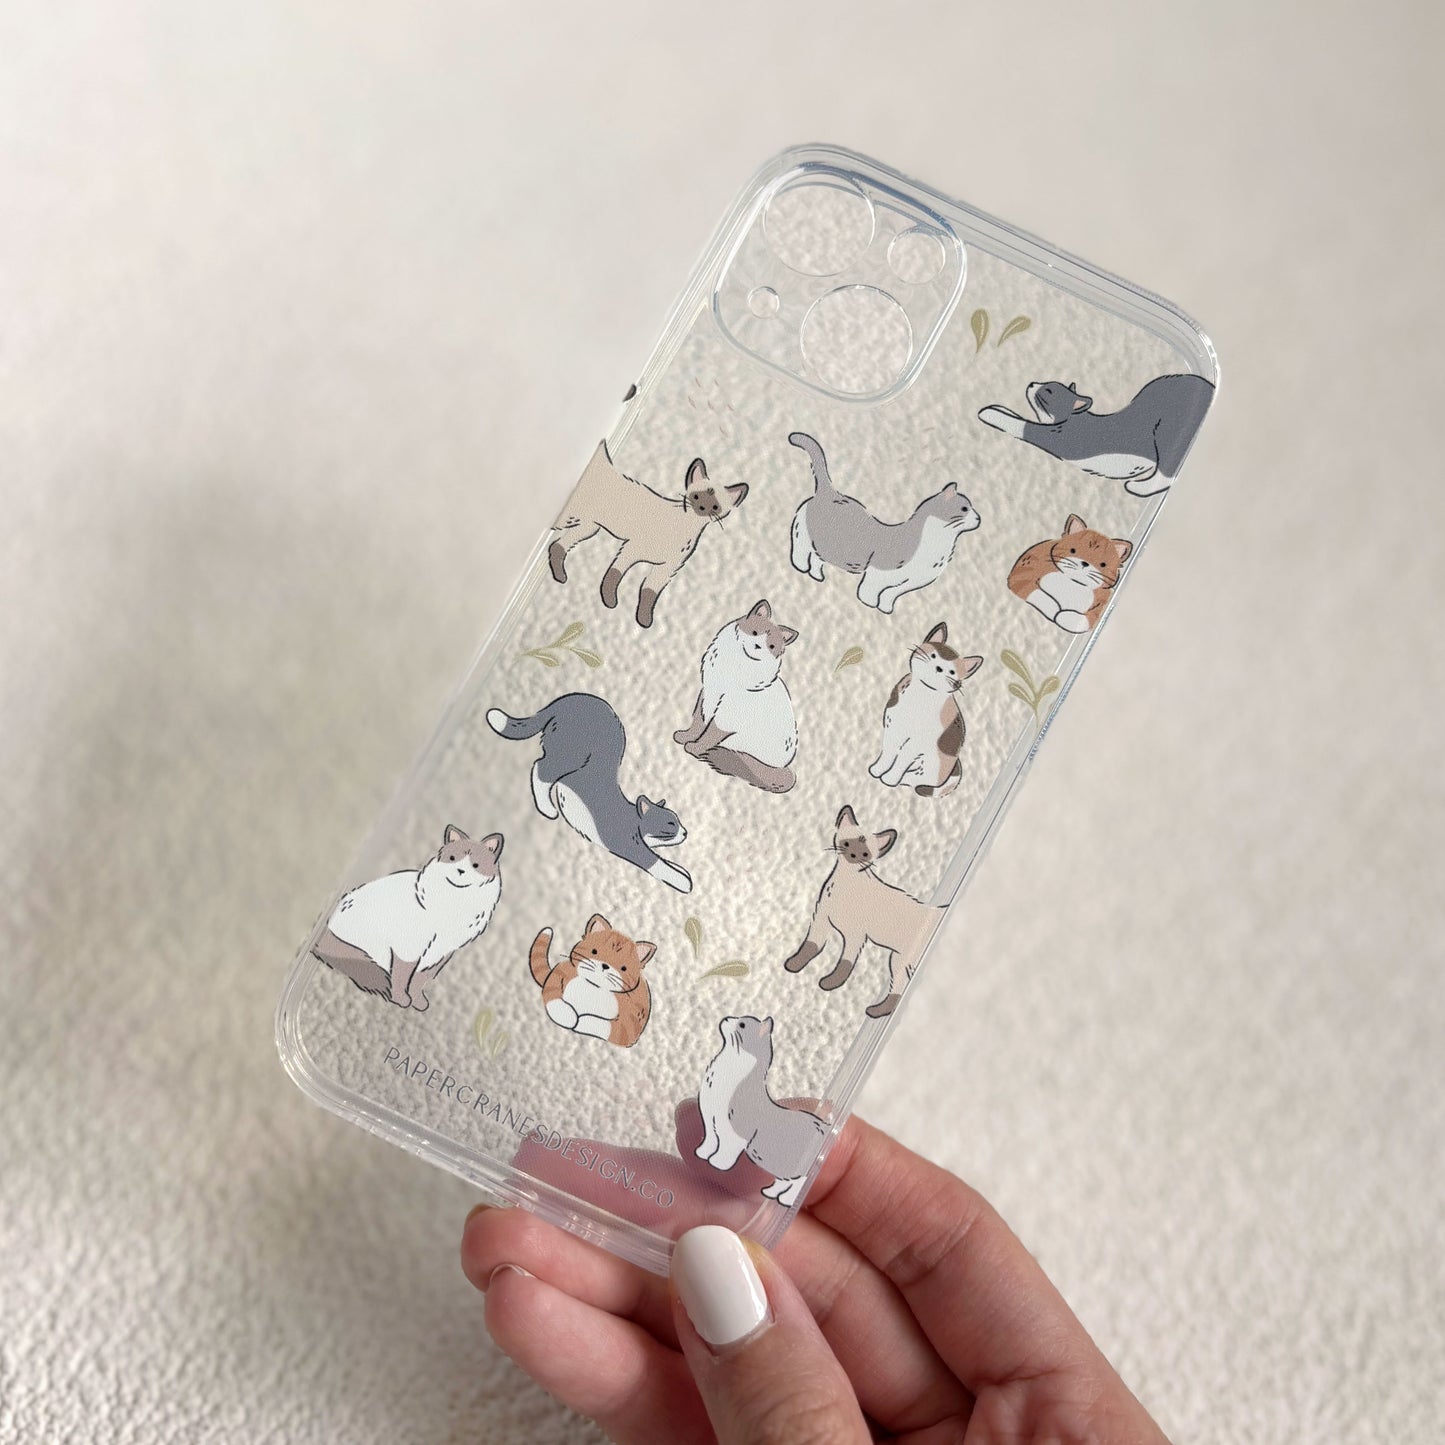 [PREORDER] Cozy Kitty iPhone Case